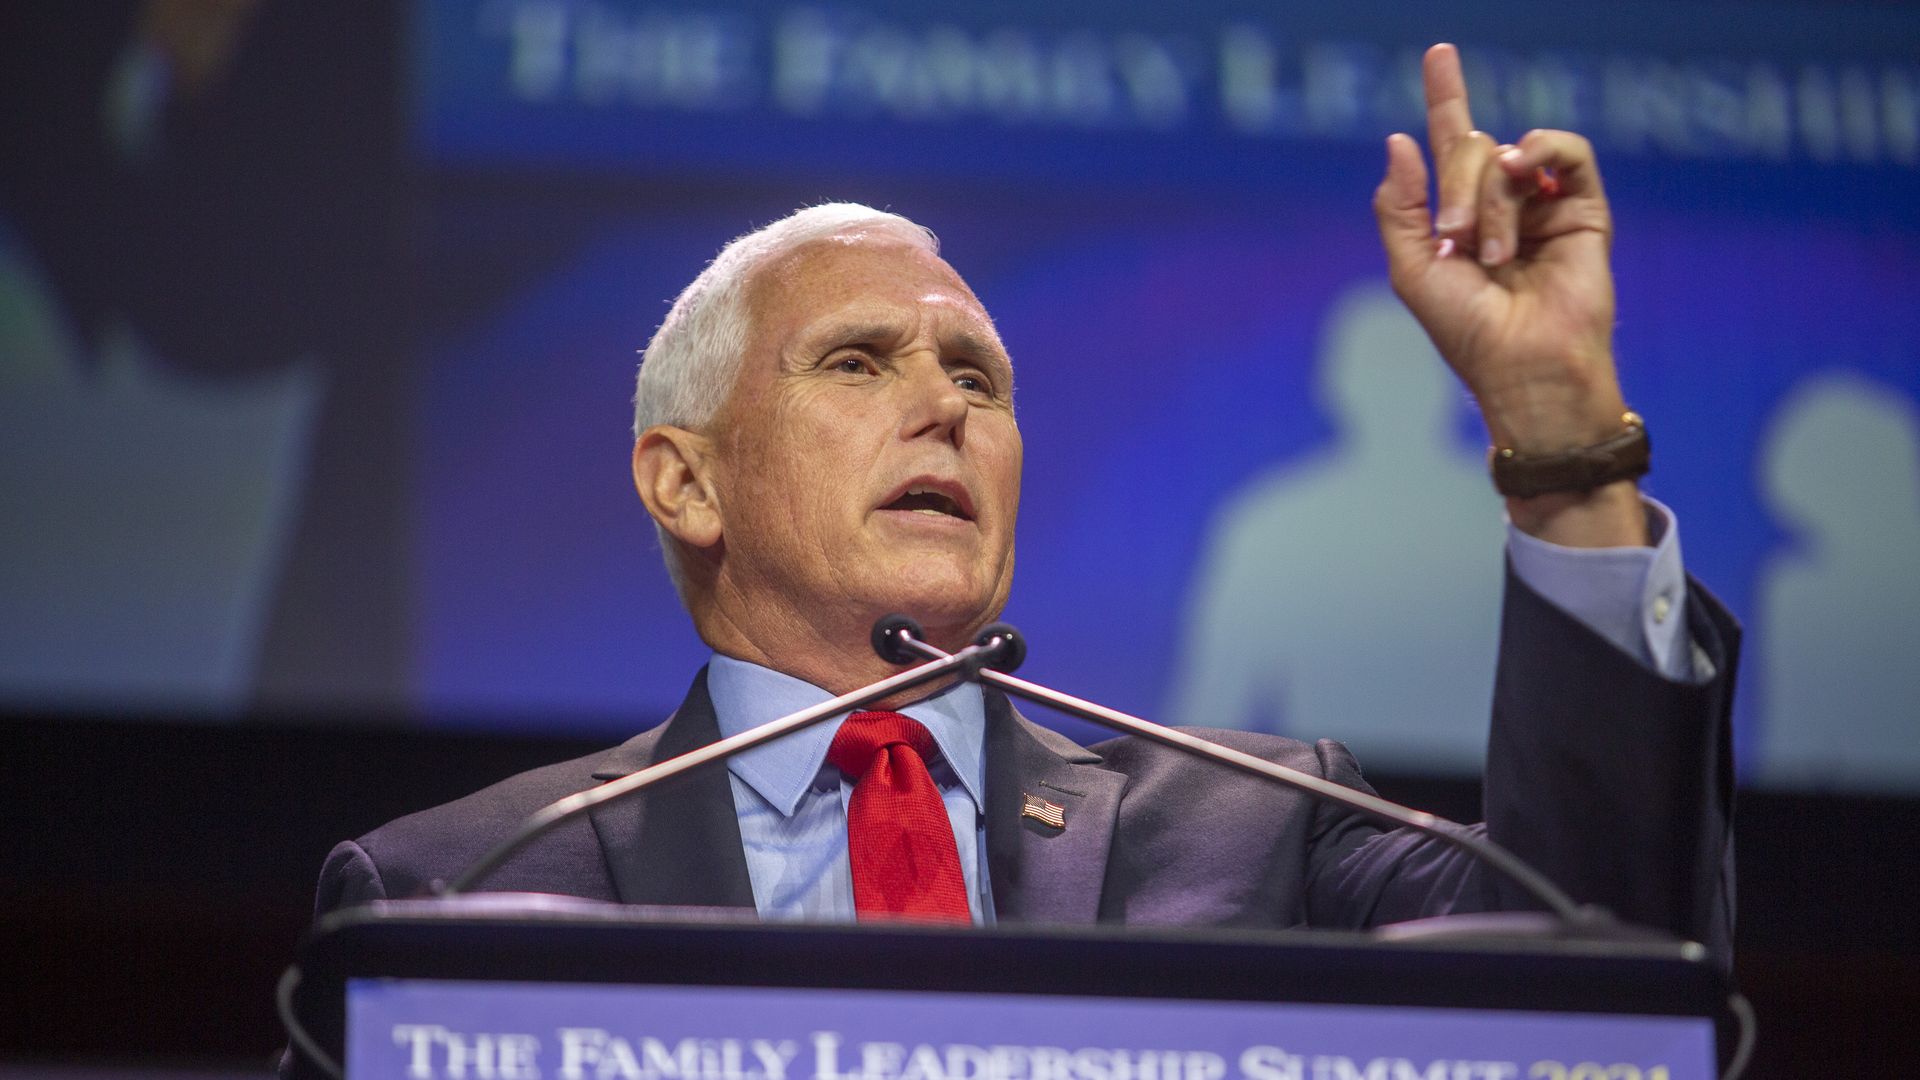 Former Vice President Mike Pence is seen speaking at a political rally.